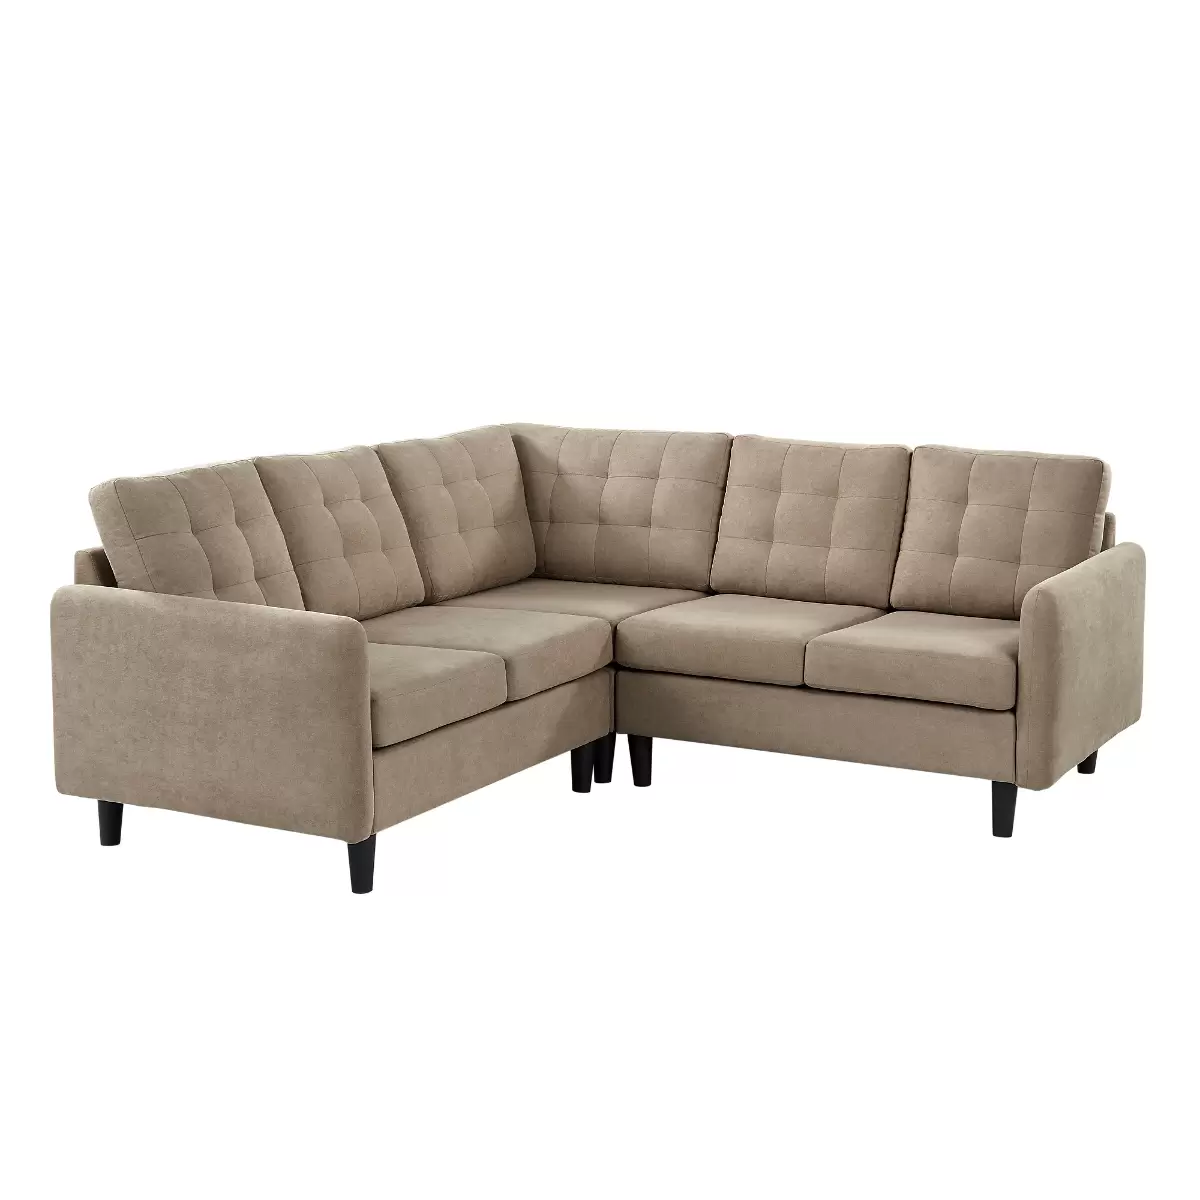 Fancy Sectional to sit your butt in...